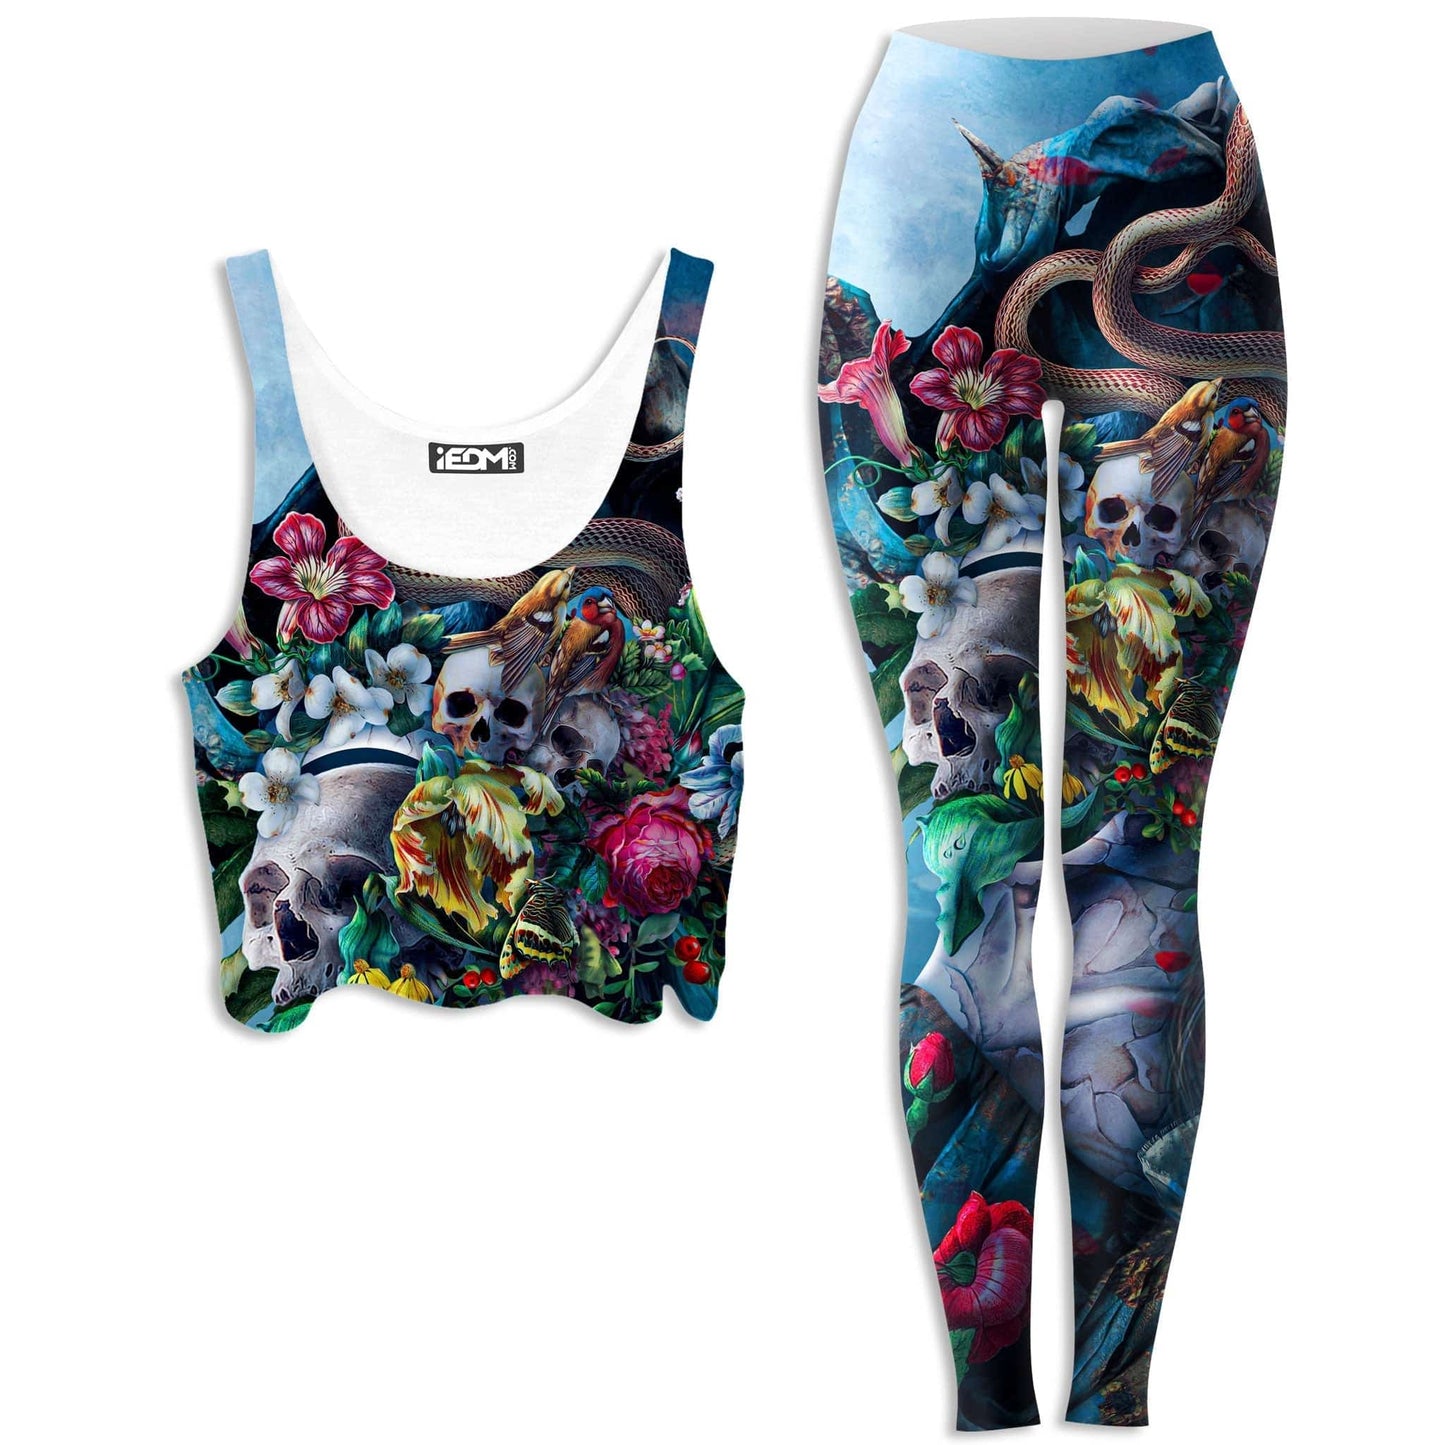 Live and Die Crop Top and Leggings Combo, Riza Peker, | iEDM